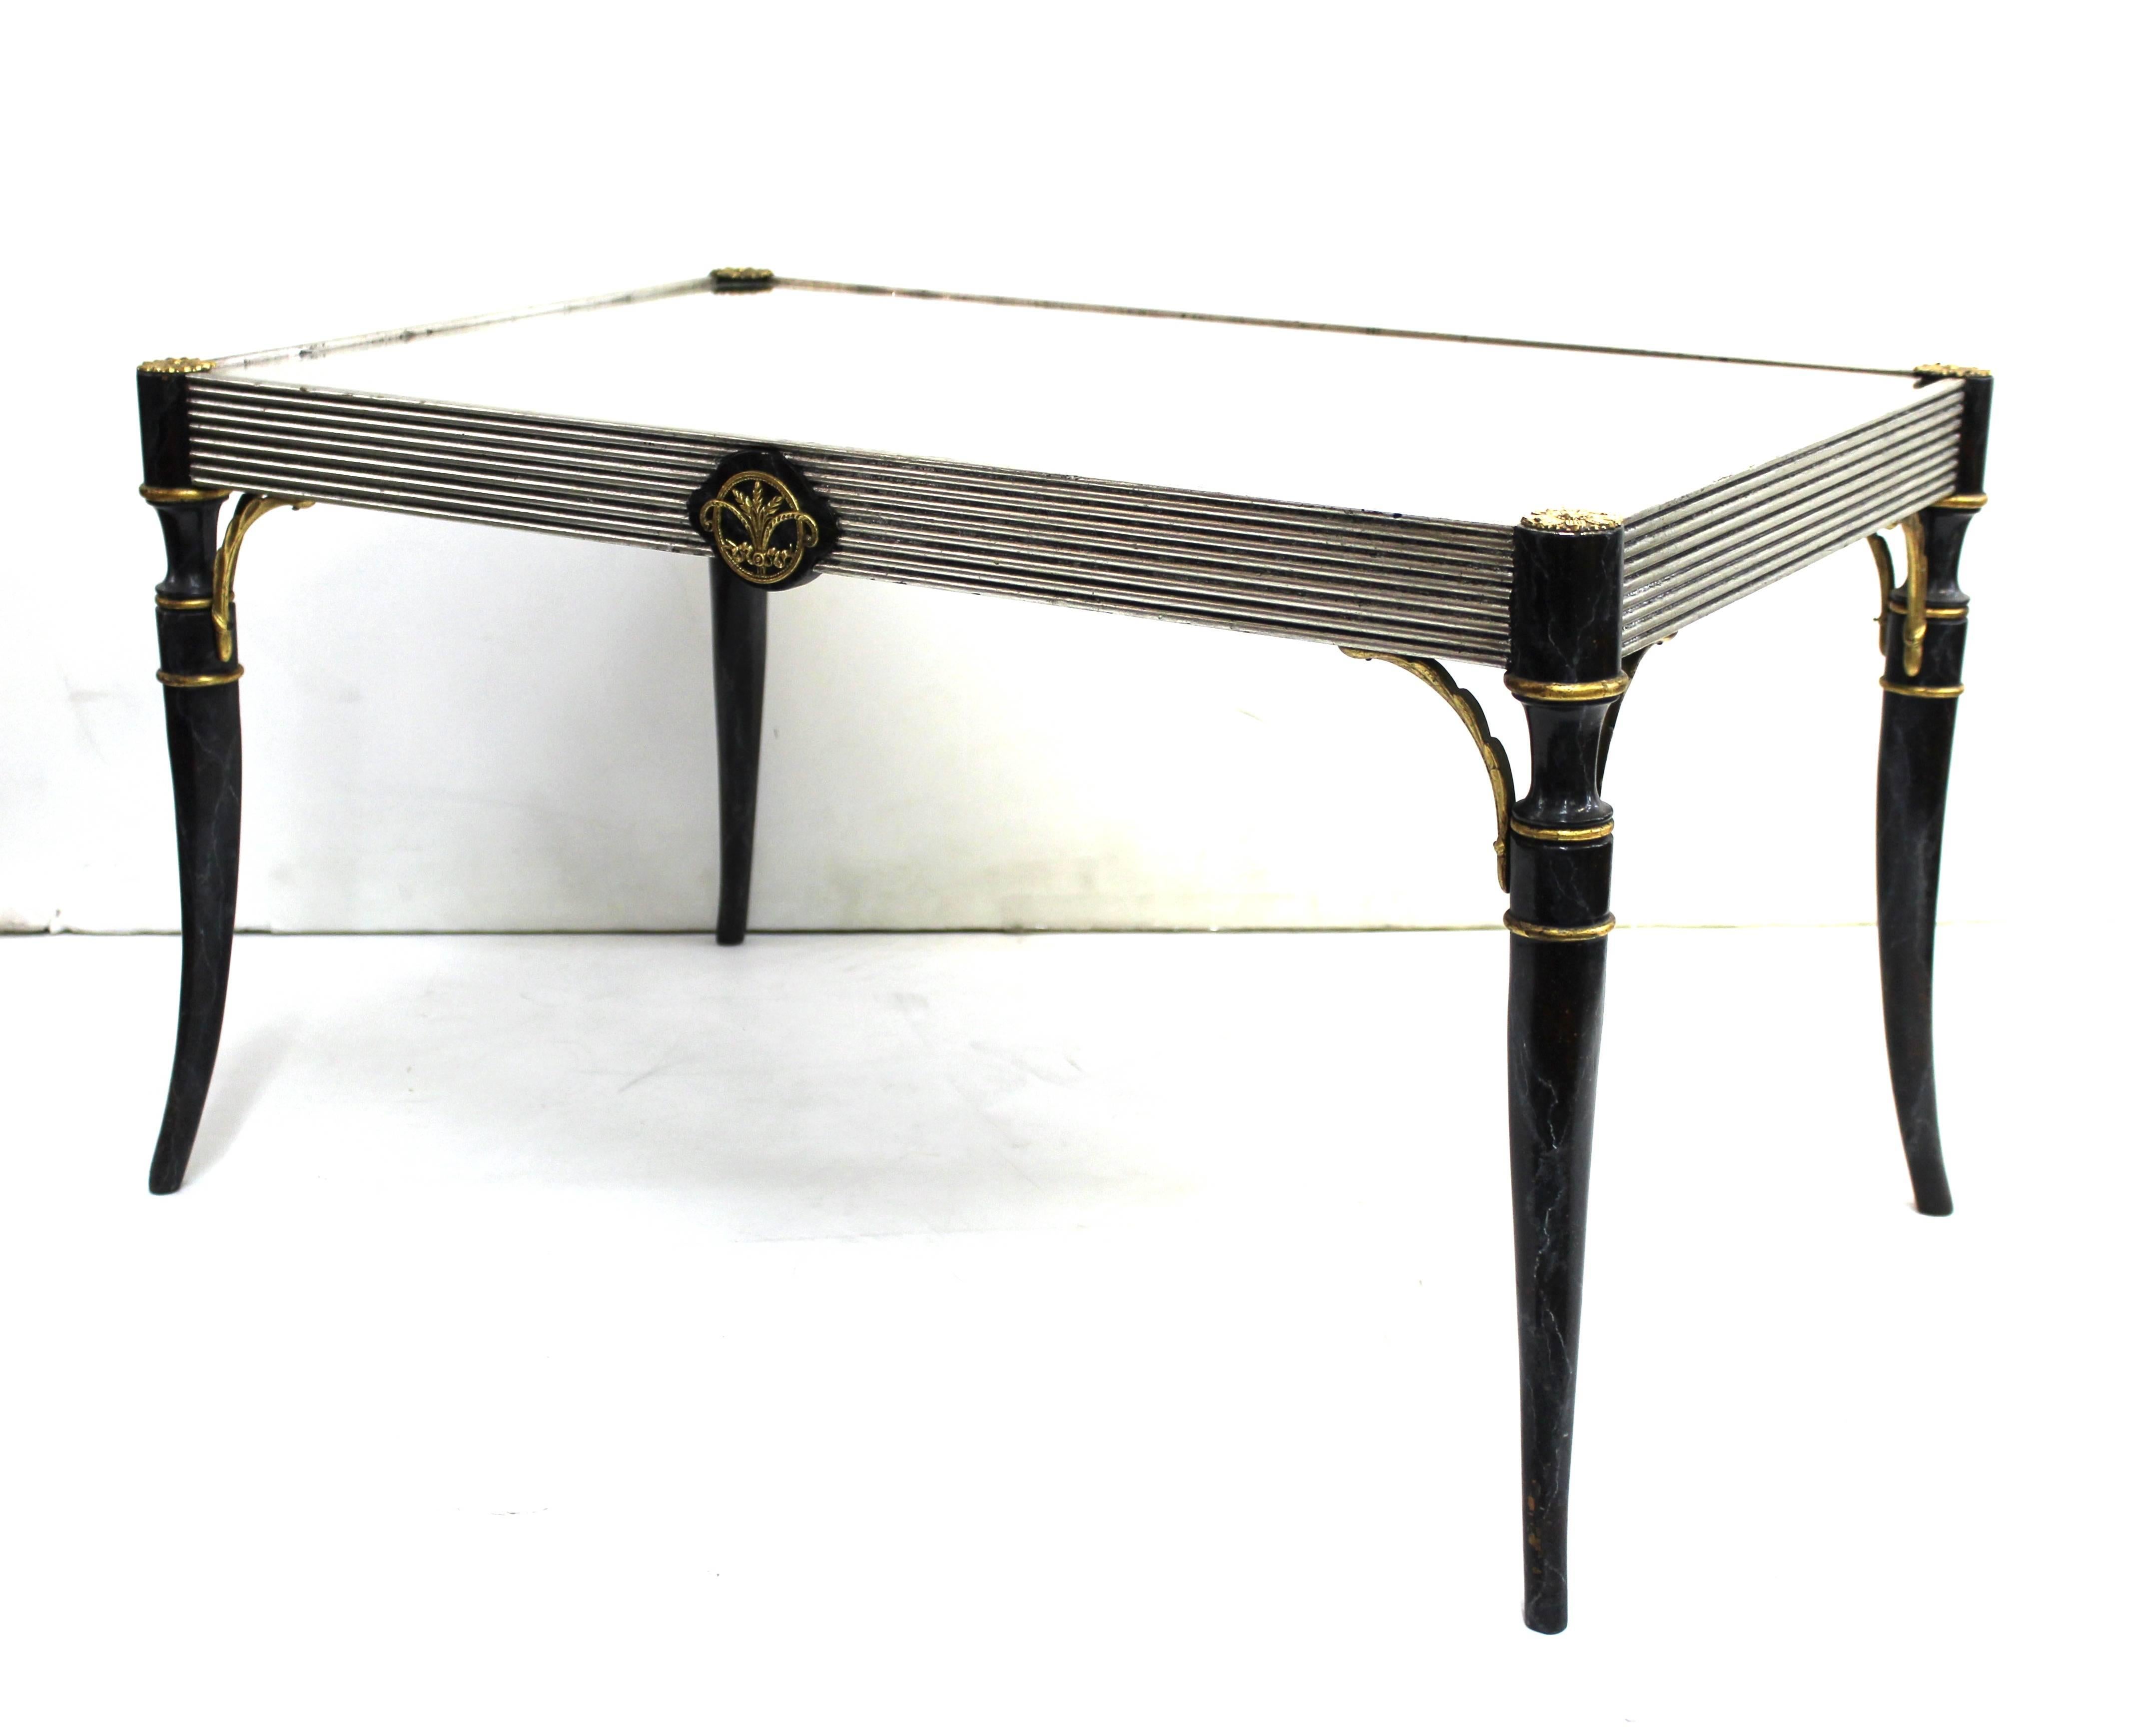 Art Deco period cocktail or coffee table in hand-painted and silvered wood with metal embellishments and a mirror top. The piece is reminiscent of the style of Maison Baguès, and was made in the 1940s. Some wear to the paint. In good vintage